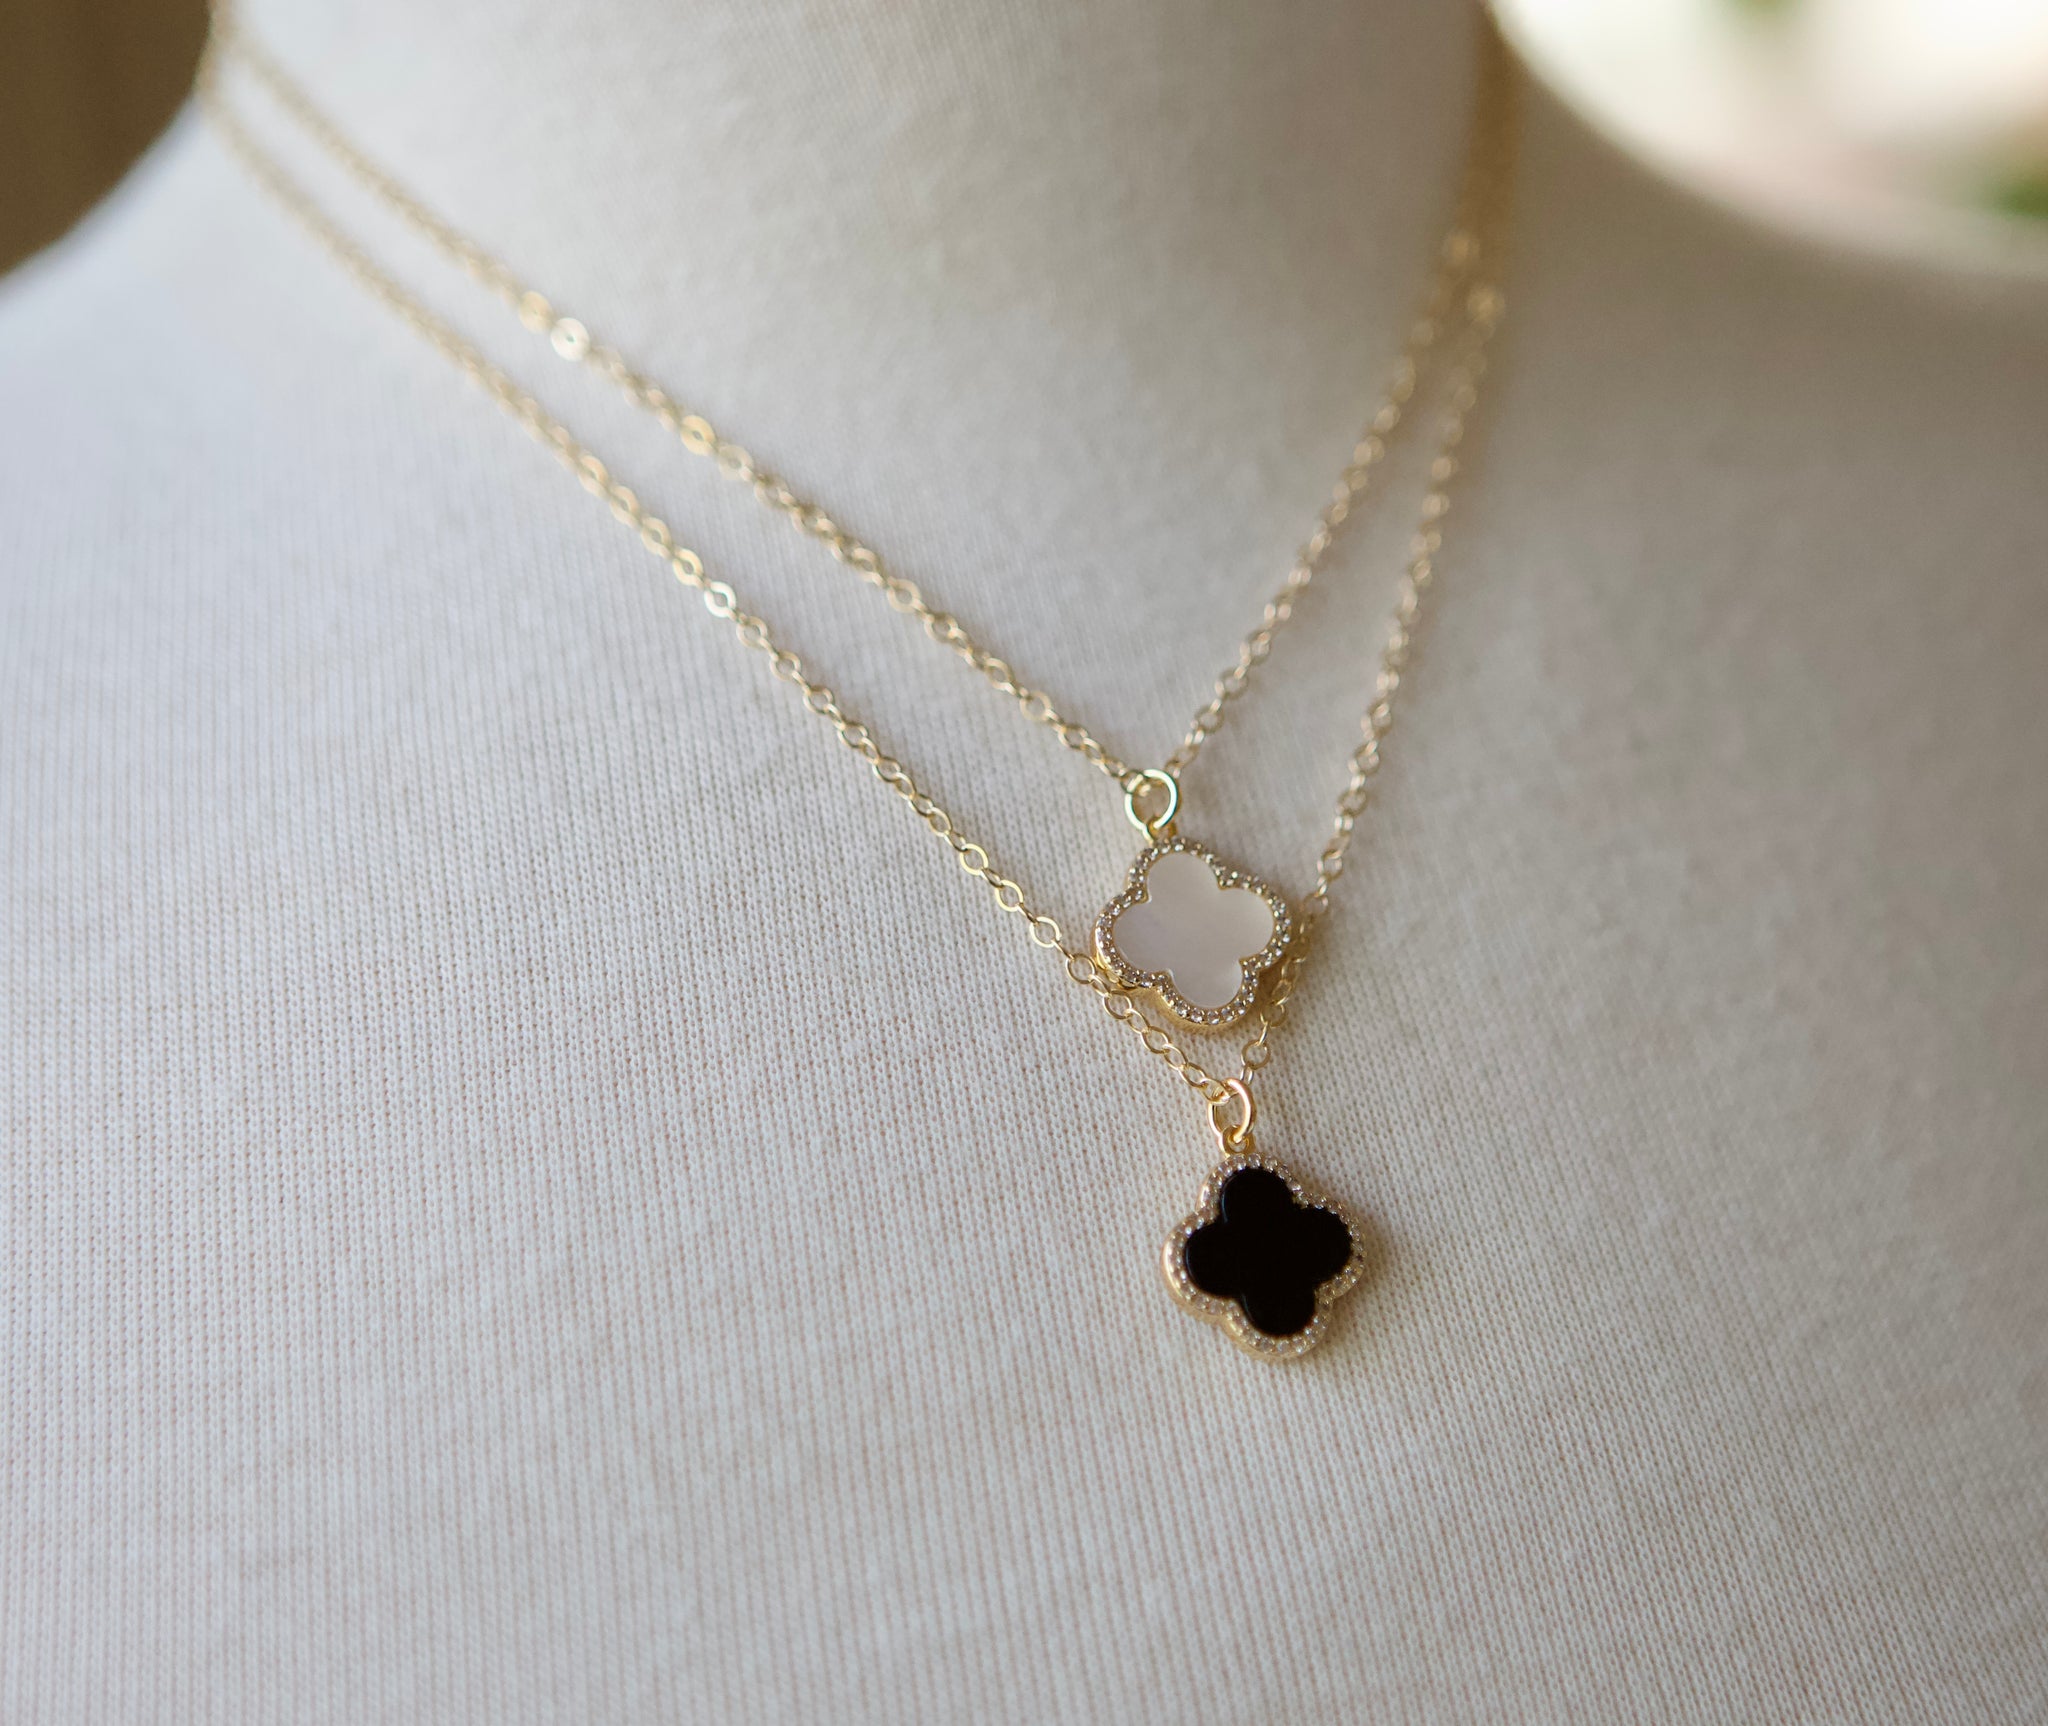 Necklace - Clover (Black) | 18K Yellow Gold